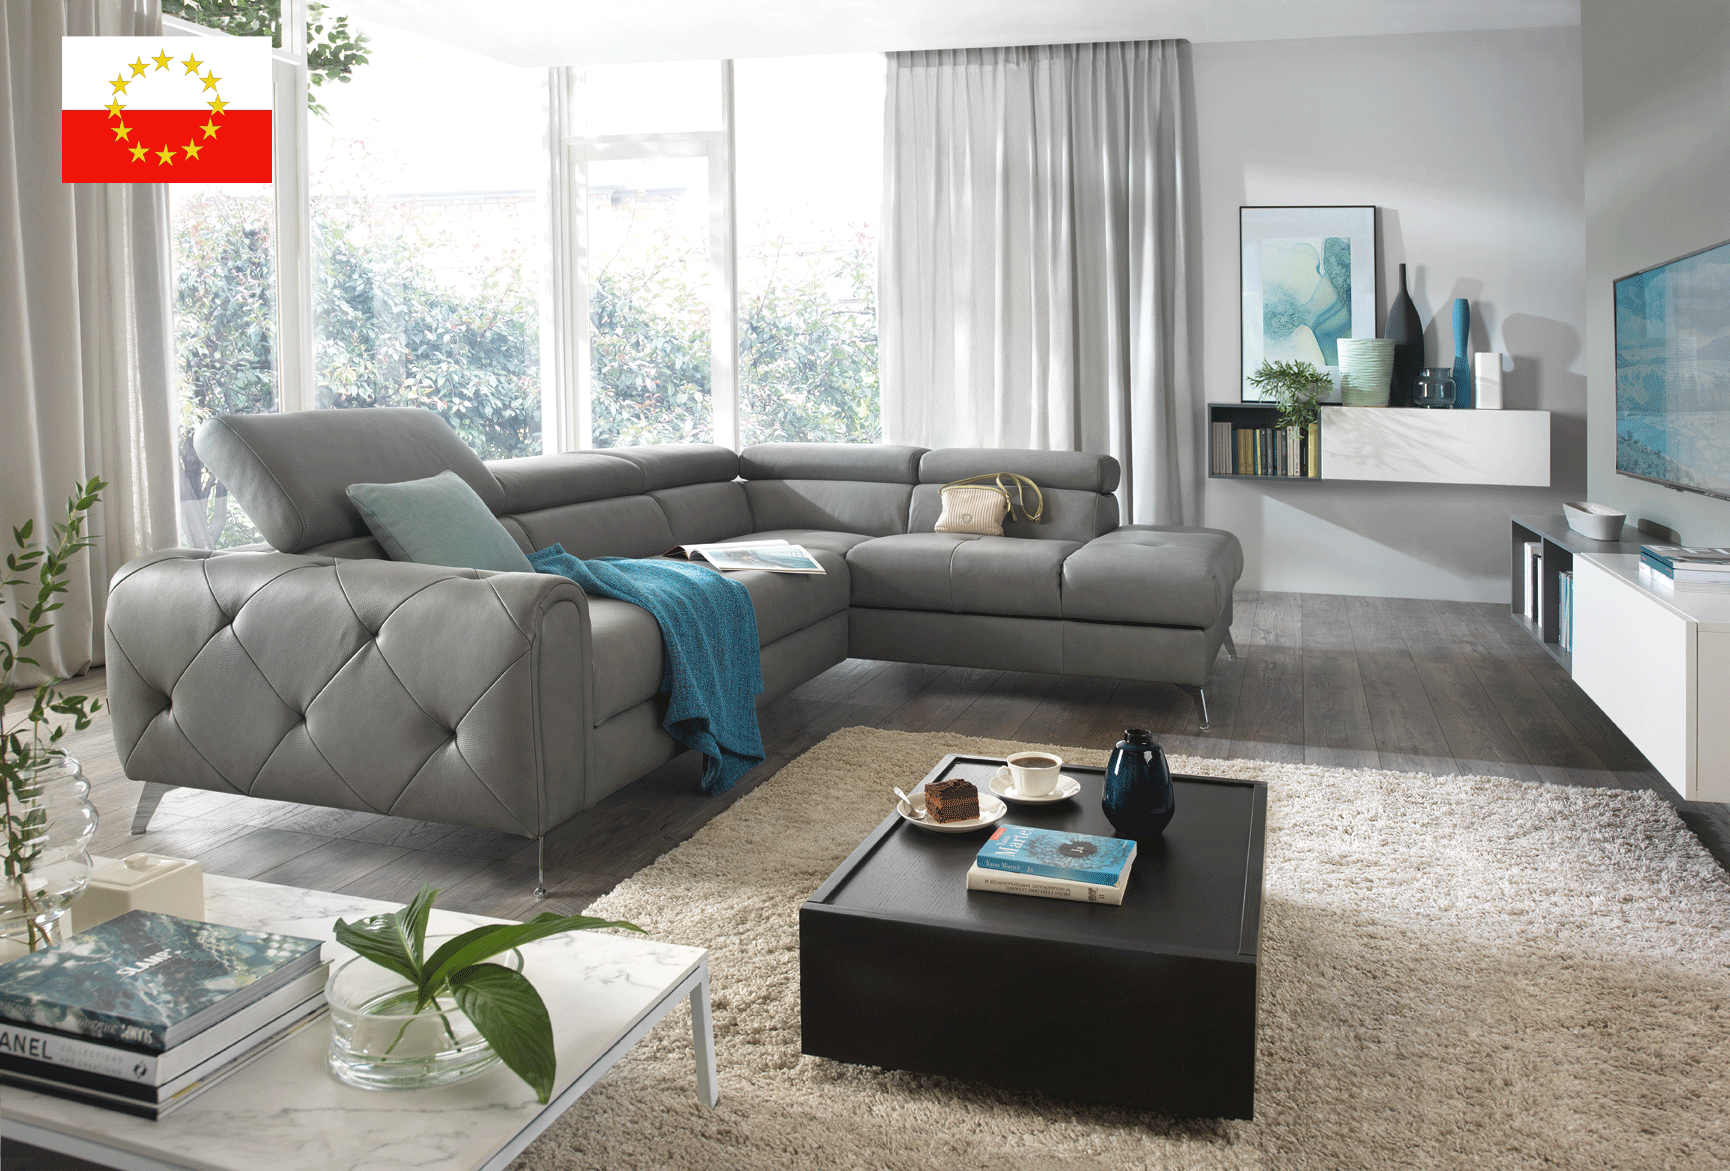 Living Room Furniture Sleepers Sofas Loveseats and Chairs Camelia Sectional w/Bed and Storage